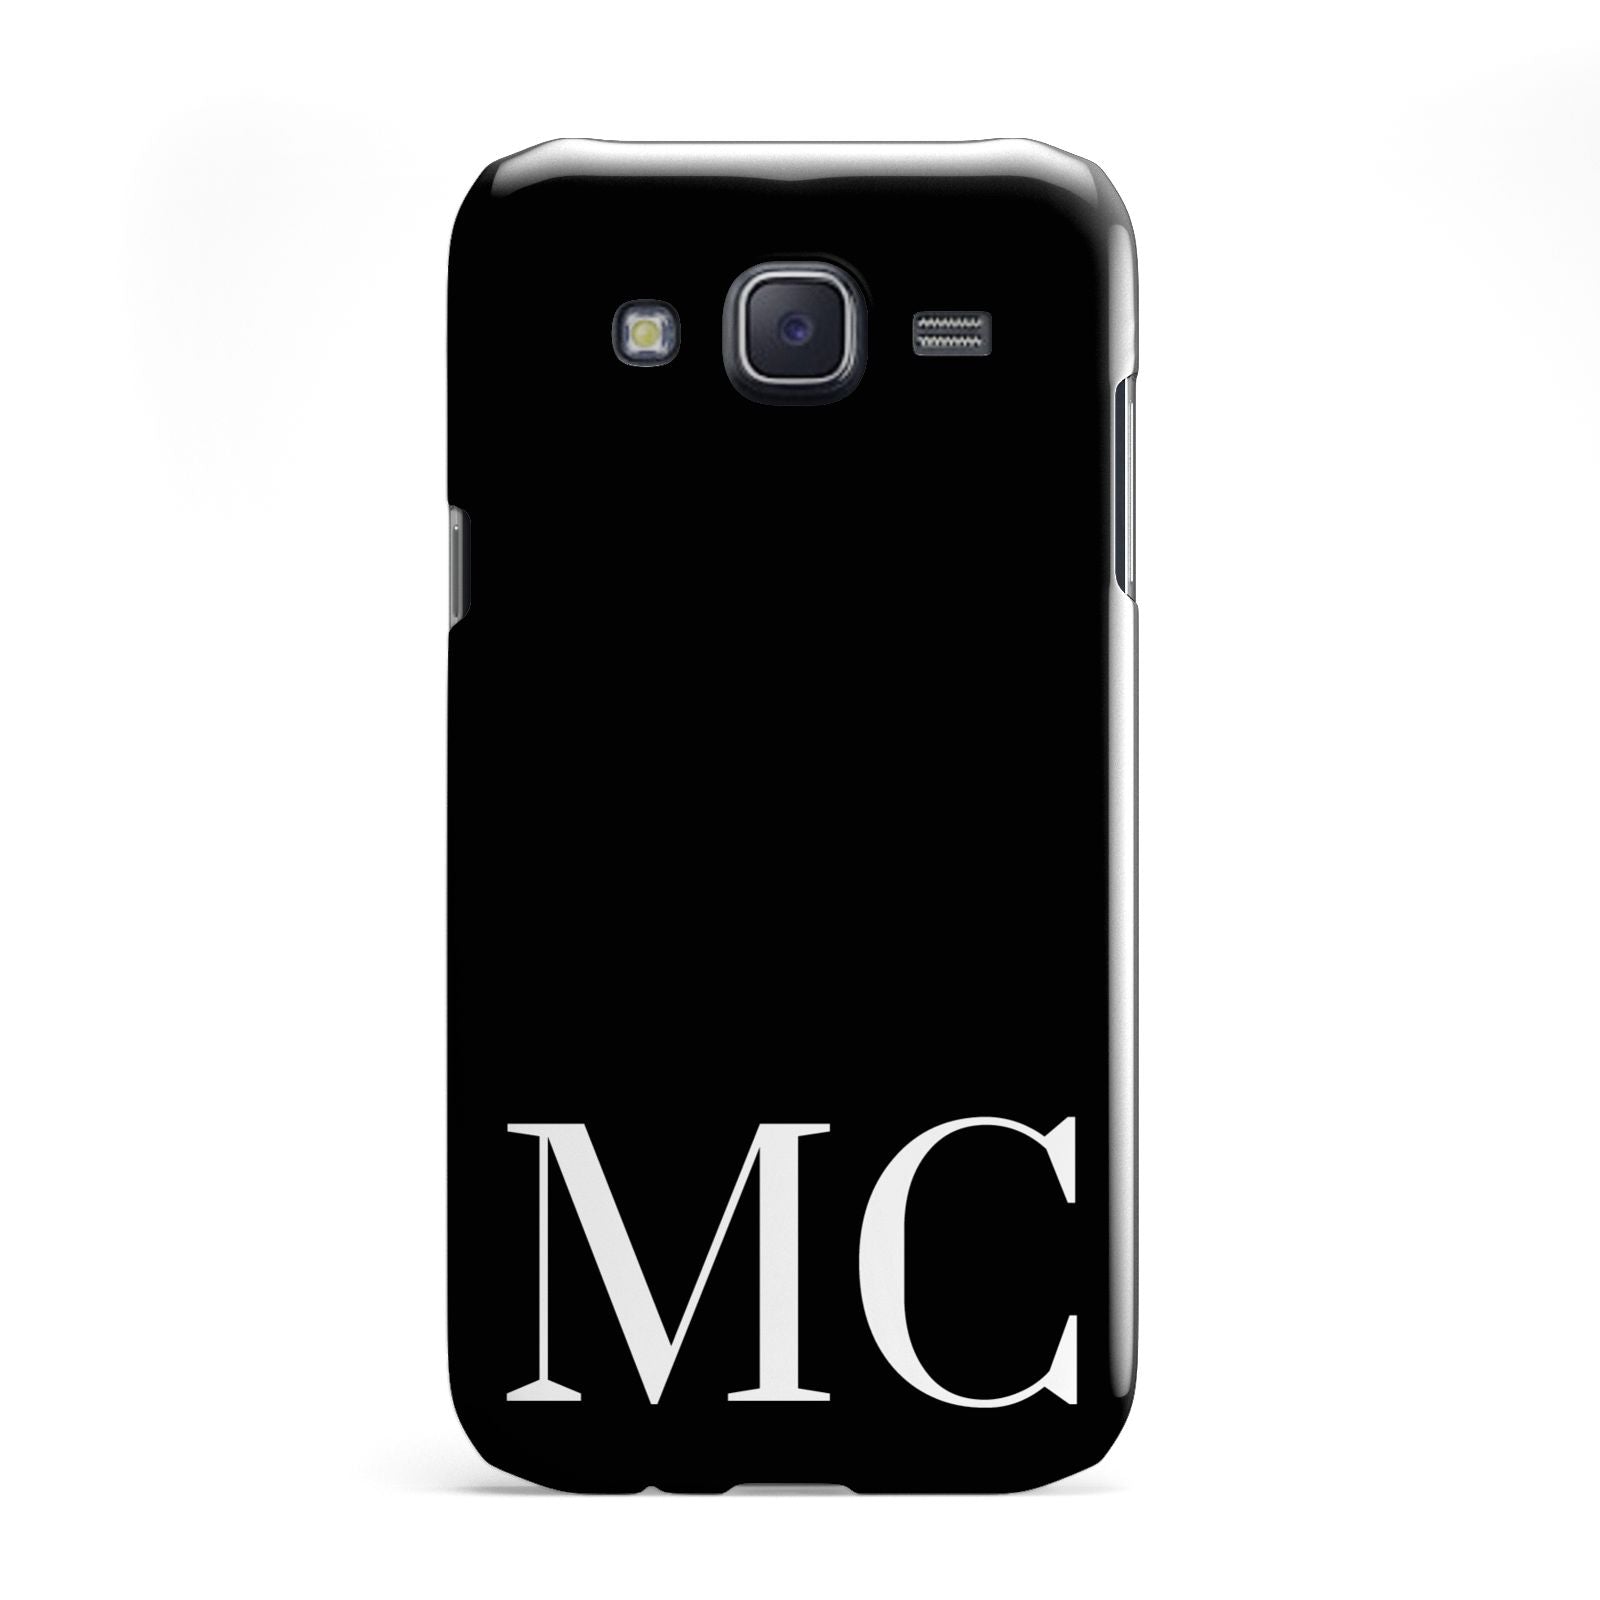 Initials Personalised 1 Samsung Galaxy J5 Case